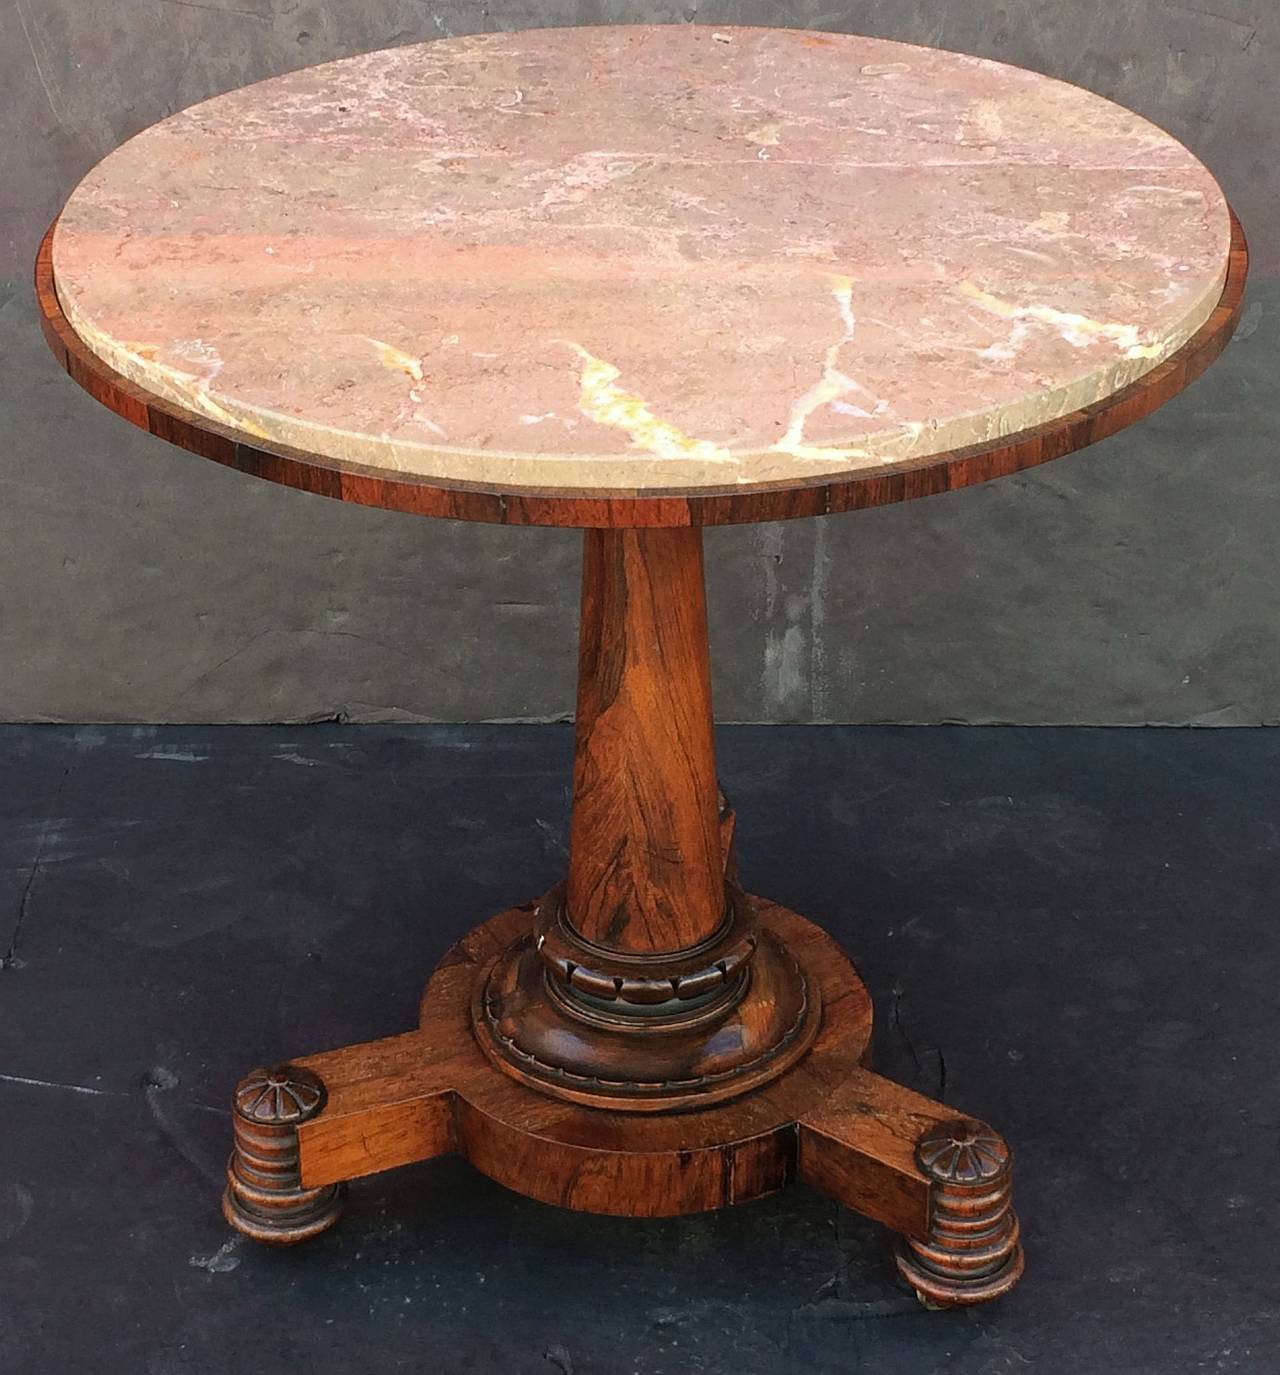 A fine French gueridon or circular table of rosewood (28